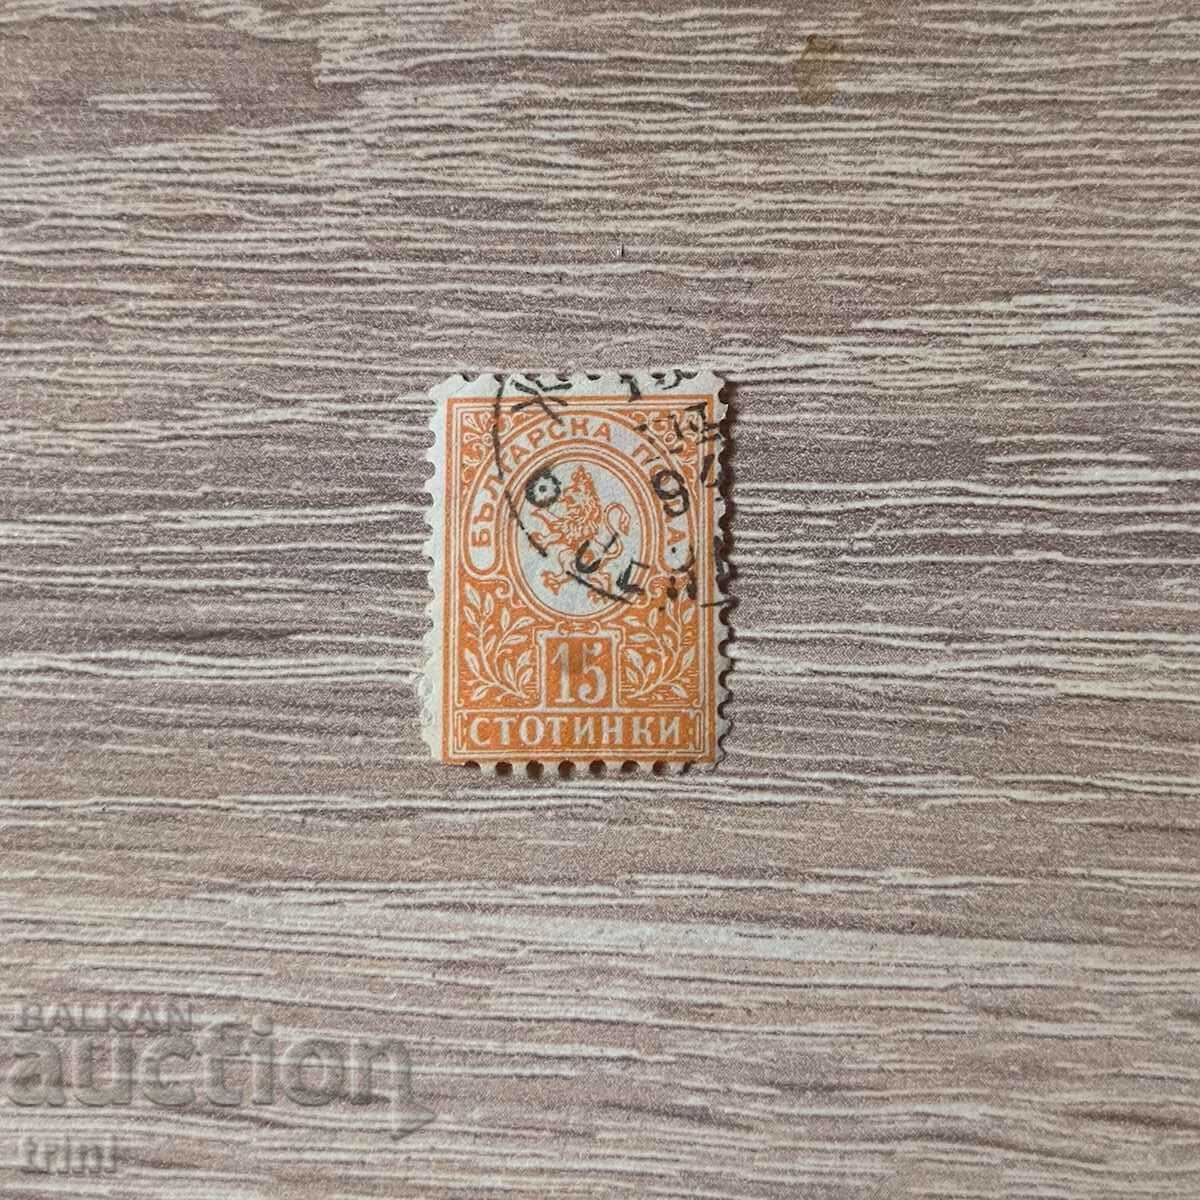 Small lion 1891 15 cents